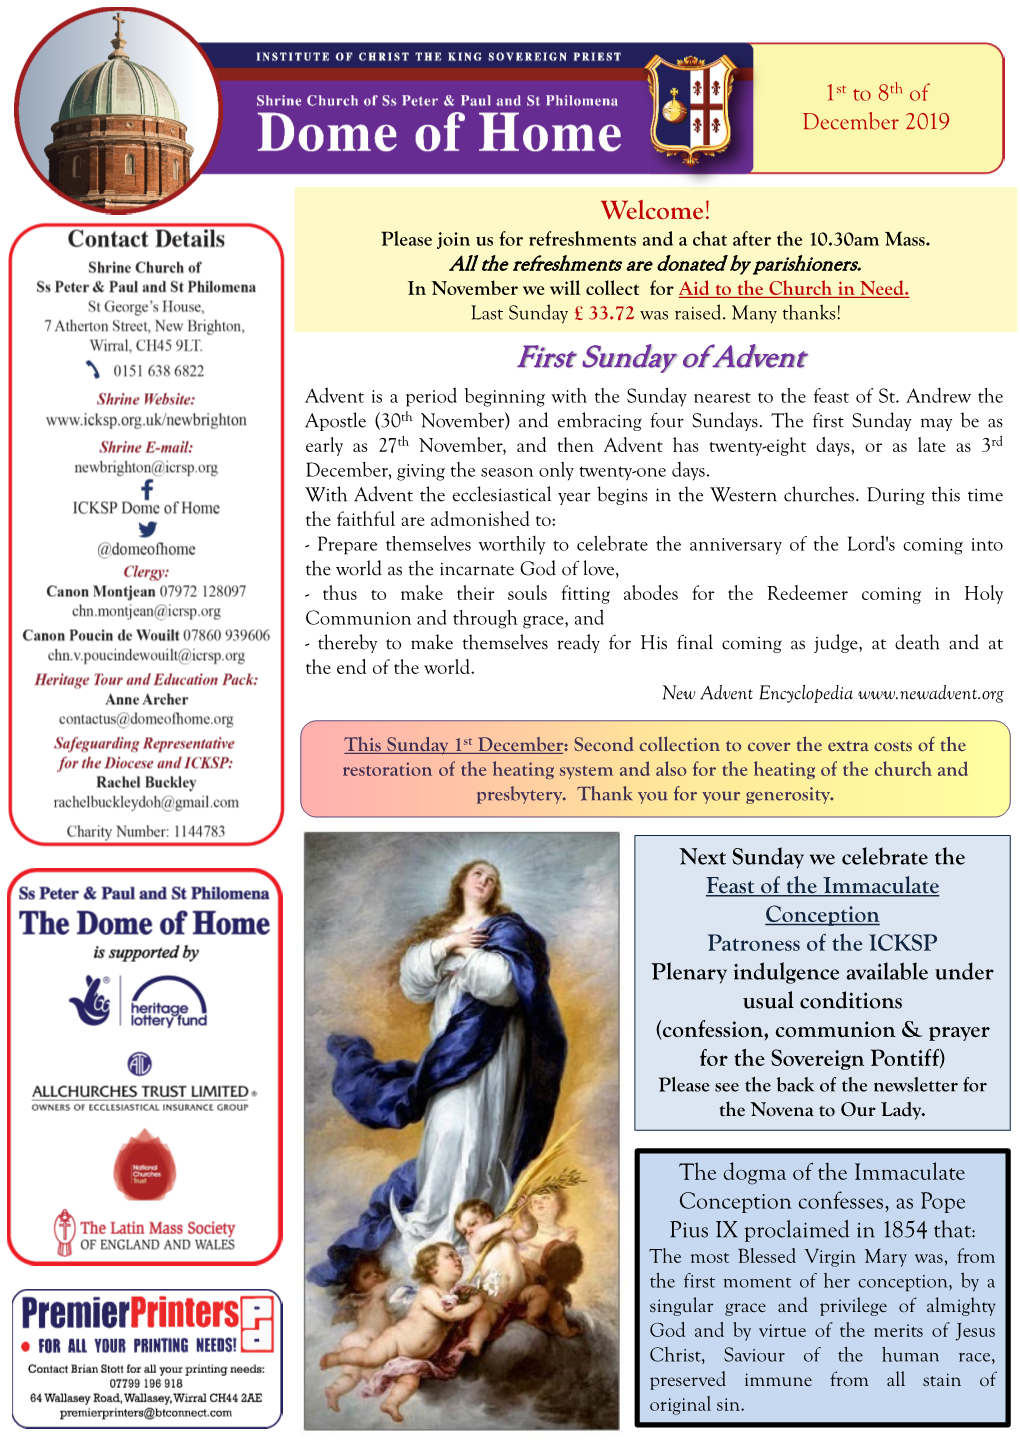 Newsletter for the Novena to Our Lady